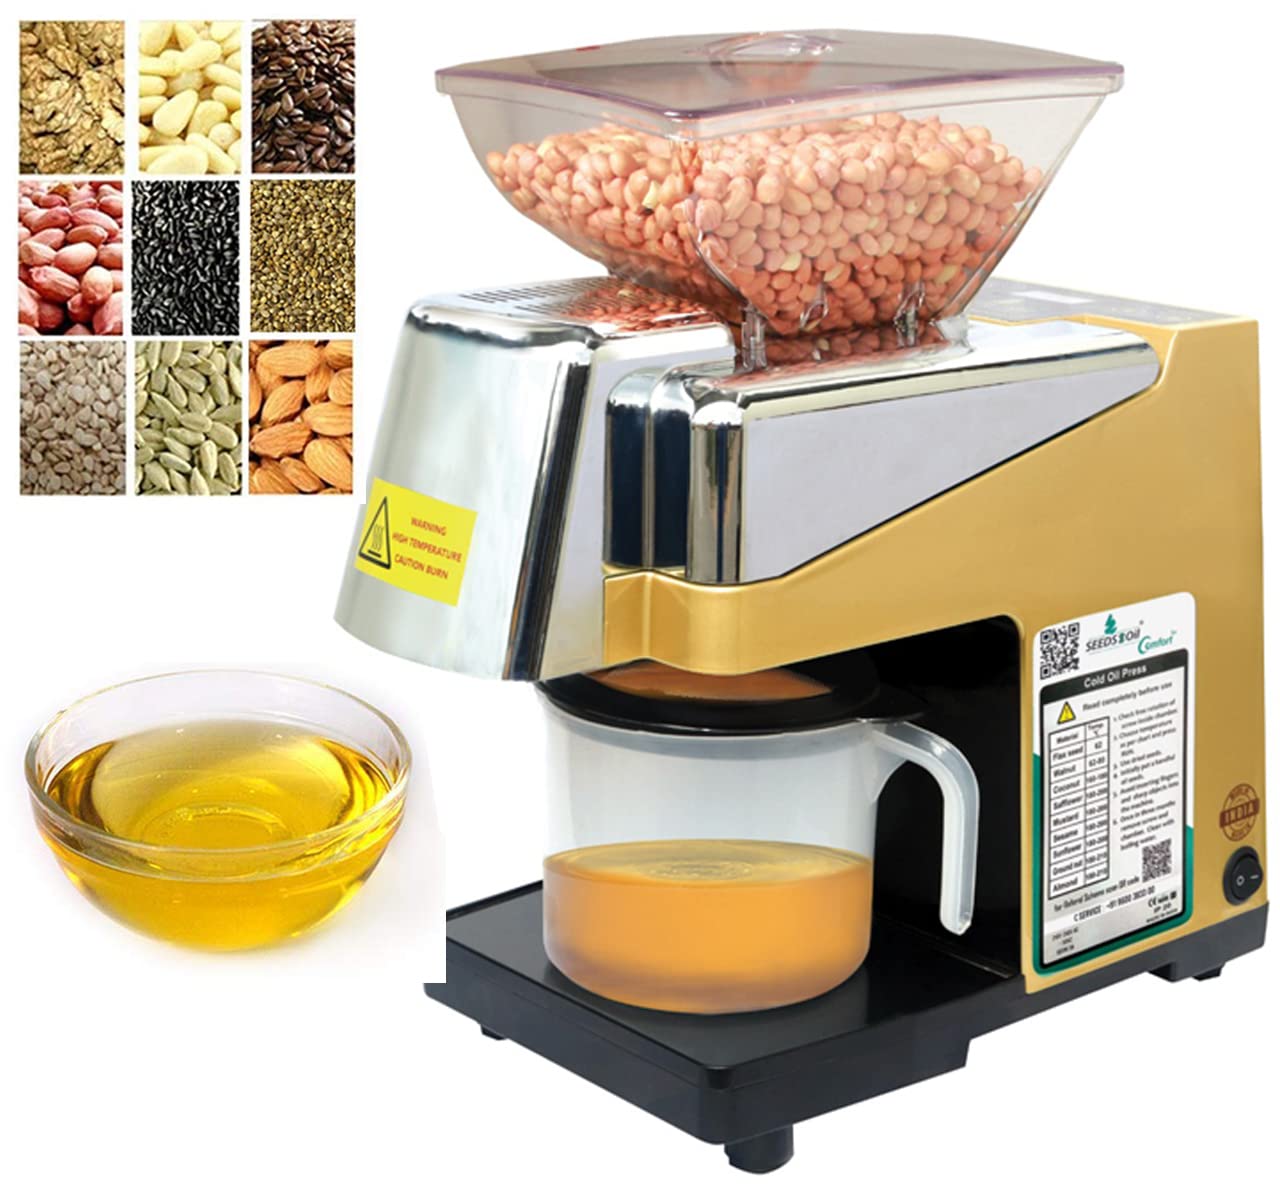 SEEDS2Oil S2O-2B Comfort Oil Extractor Machine For Home